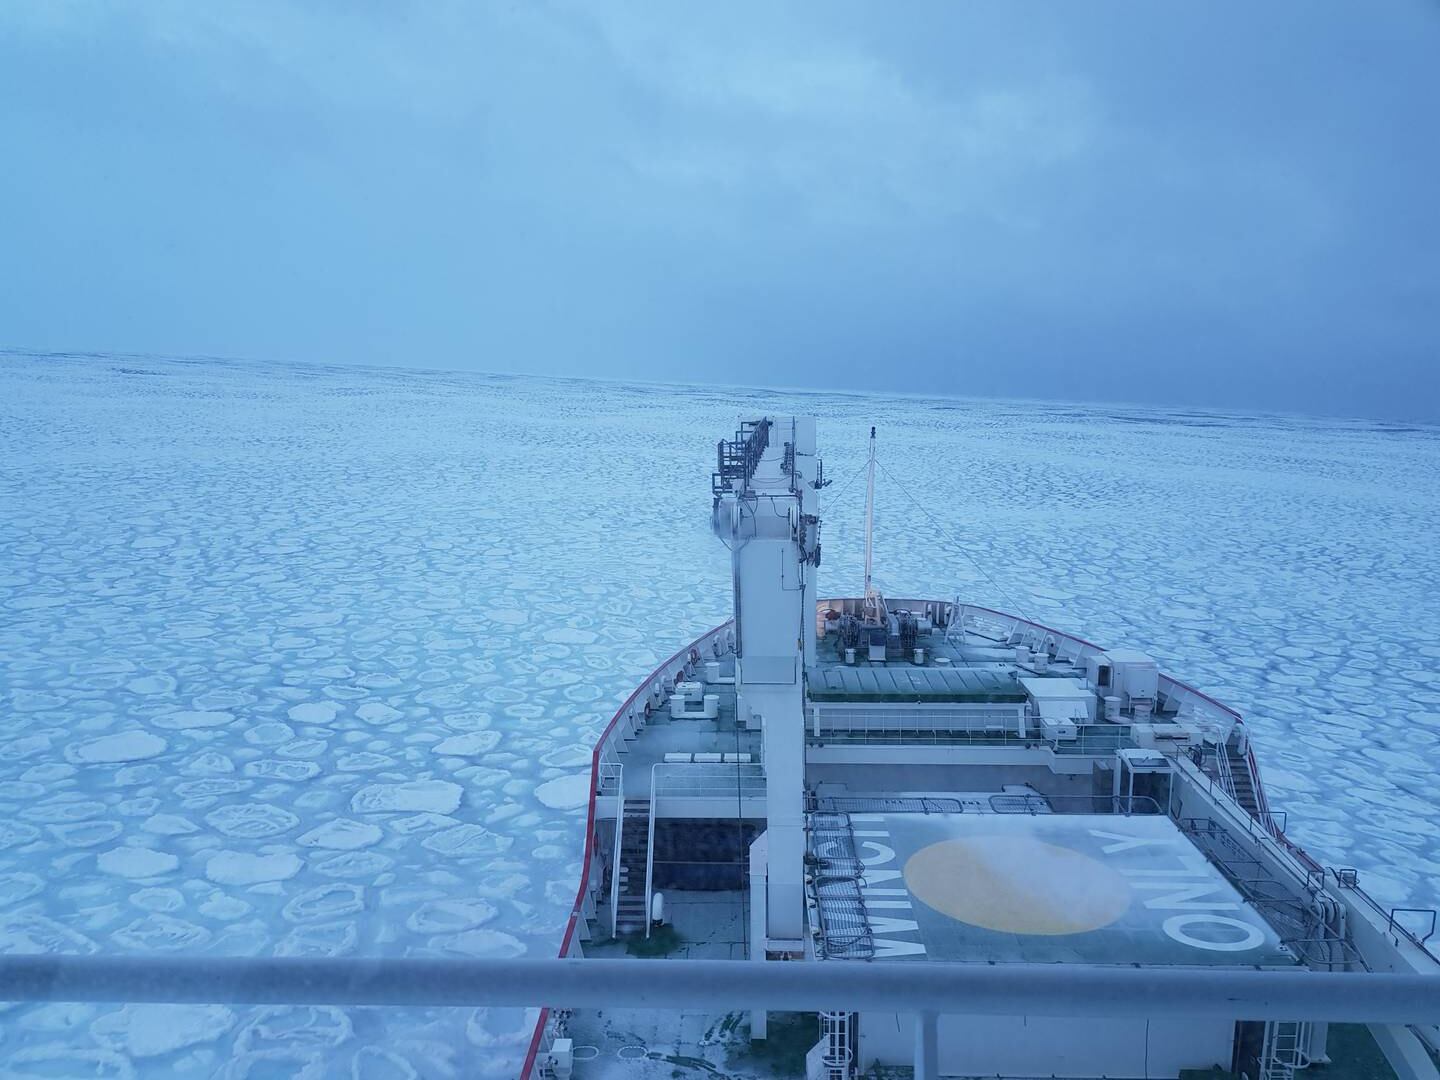 Researchers travel through sea ice in the Atlantic Southern Ocean aboard the S. A. Agulhas II, a South African icebreaking polar supply and research ship in the winter of 2017. Courtesy: Clare Eayrs